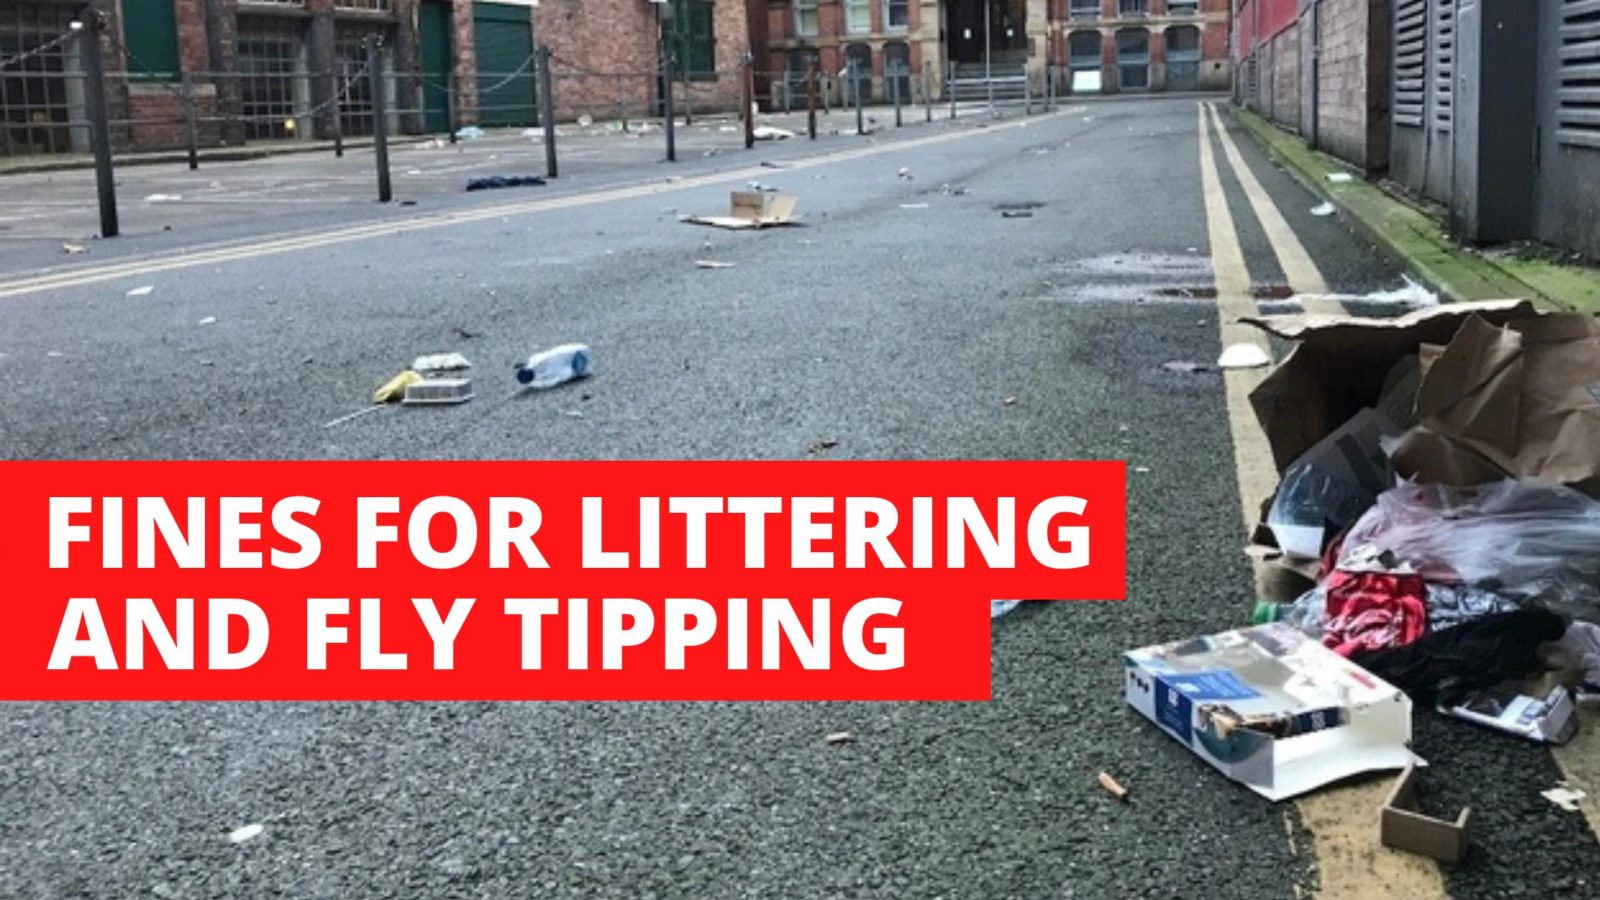 Crack down on littering in Manchester